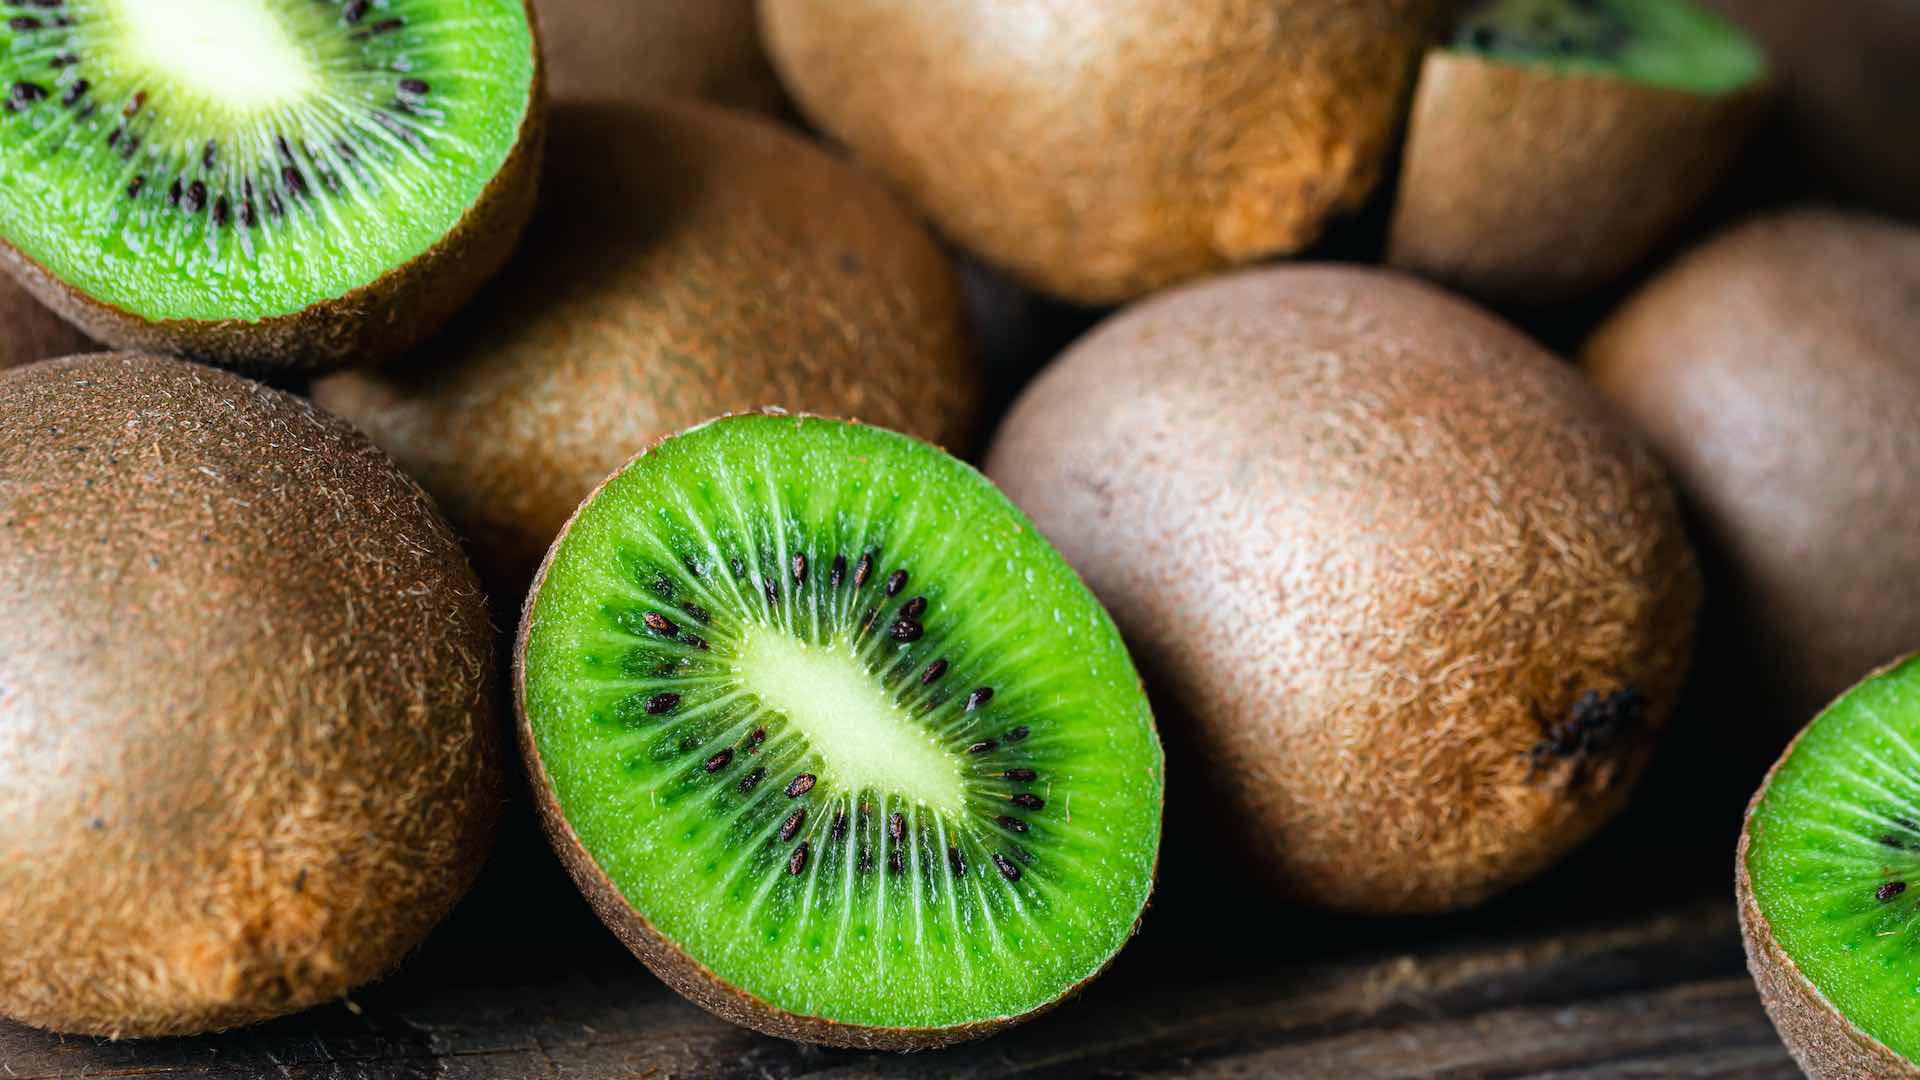 Kiwi consumption linked to mental health benefits, researchers find